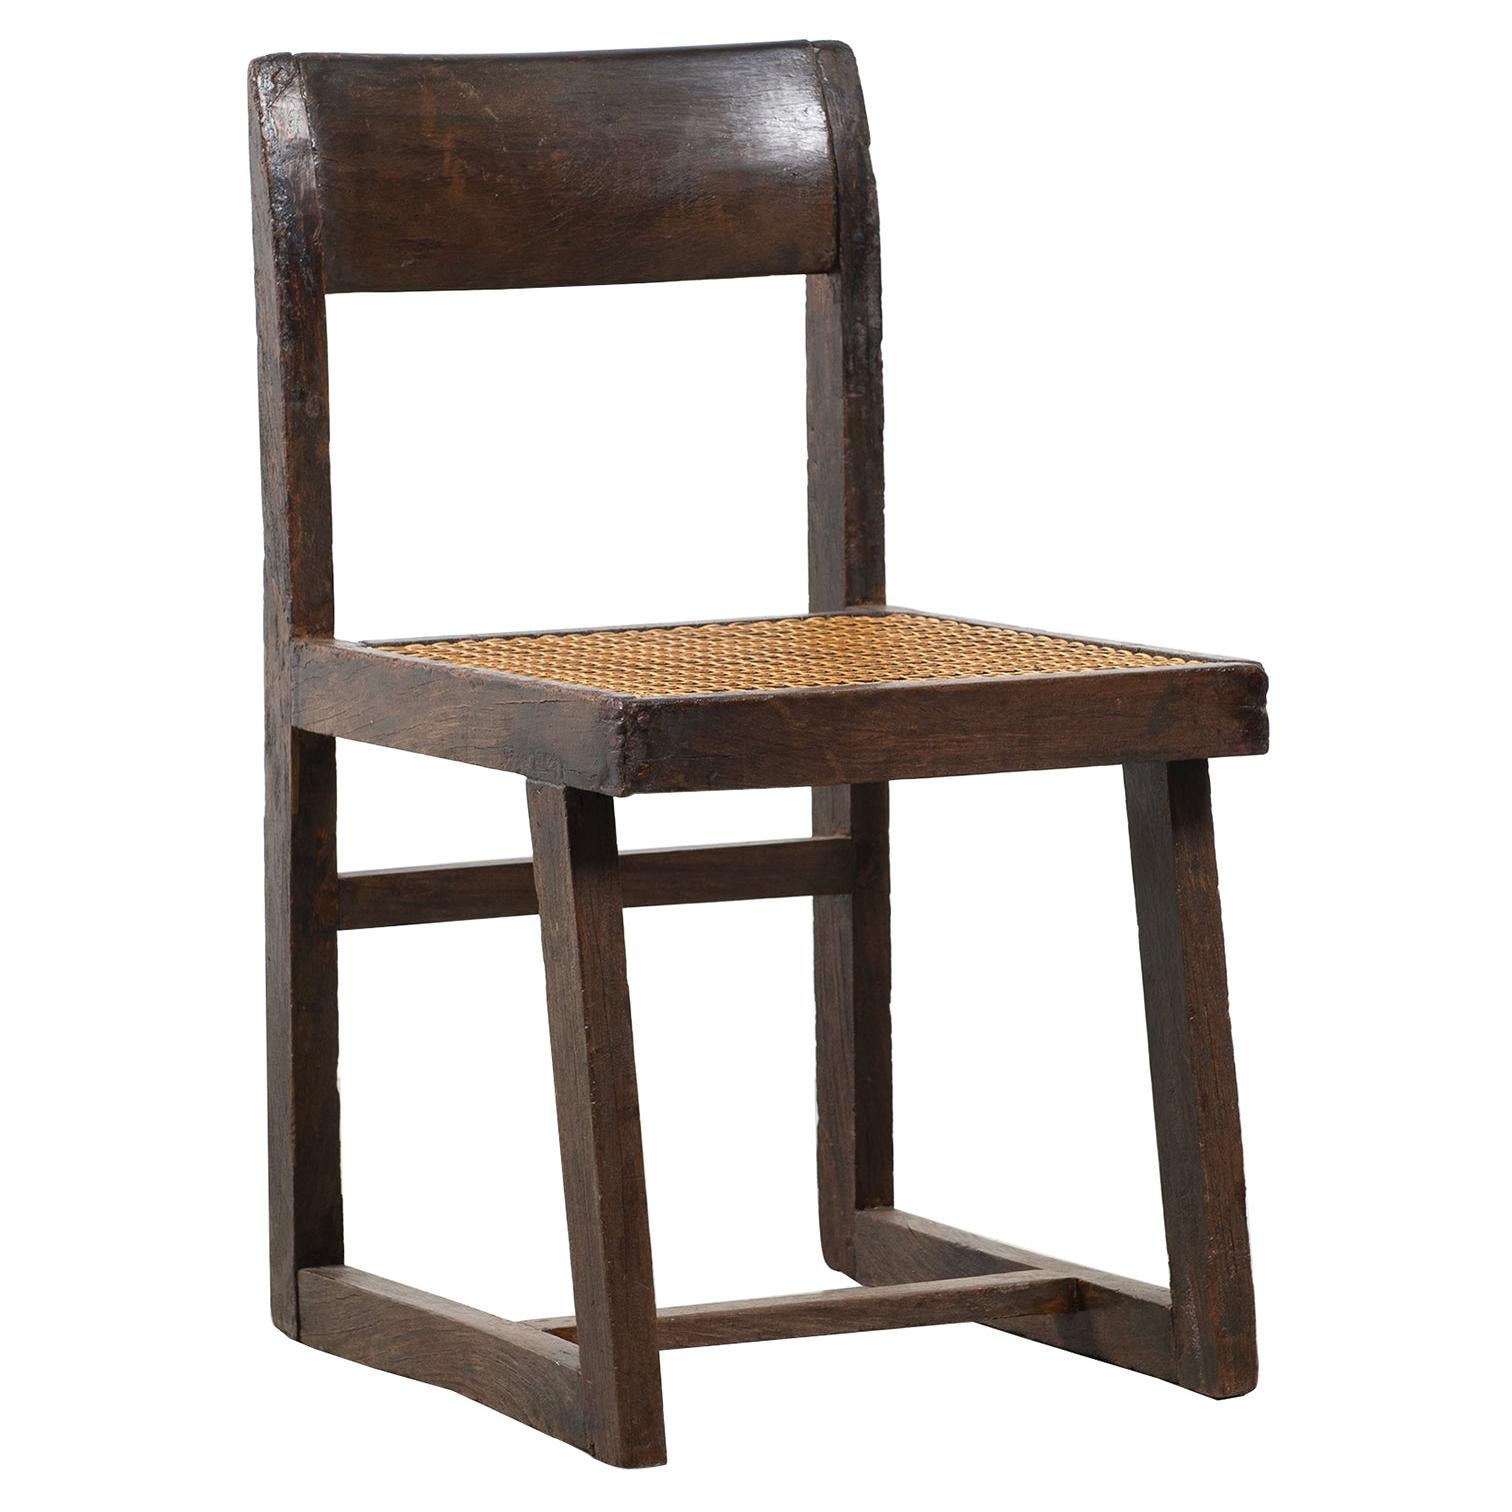 Pierre Jeanneret, Chair, ca. 1960 For Sale